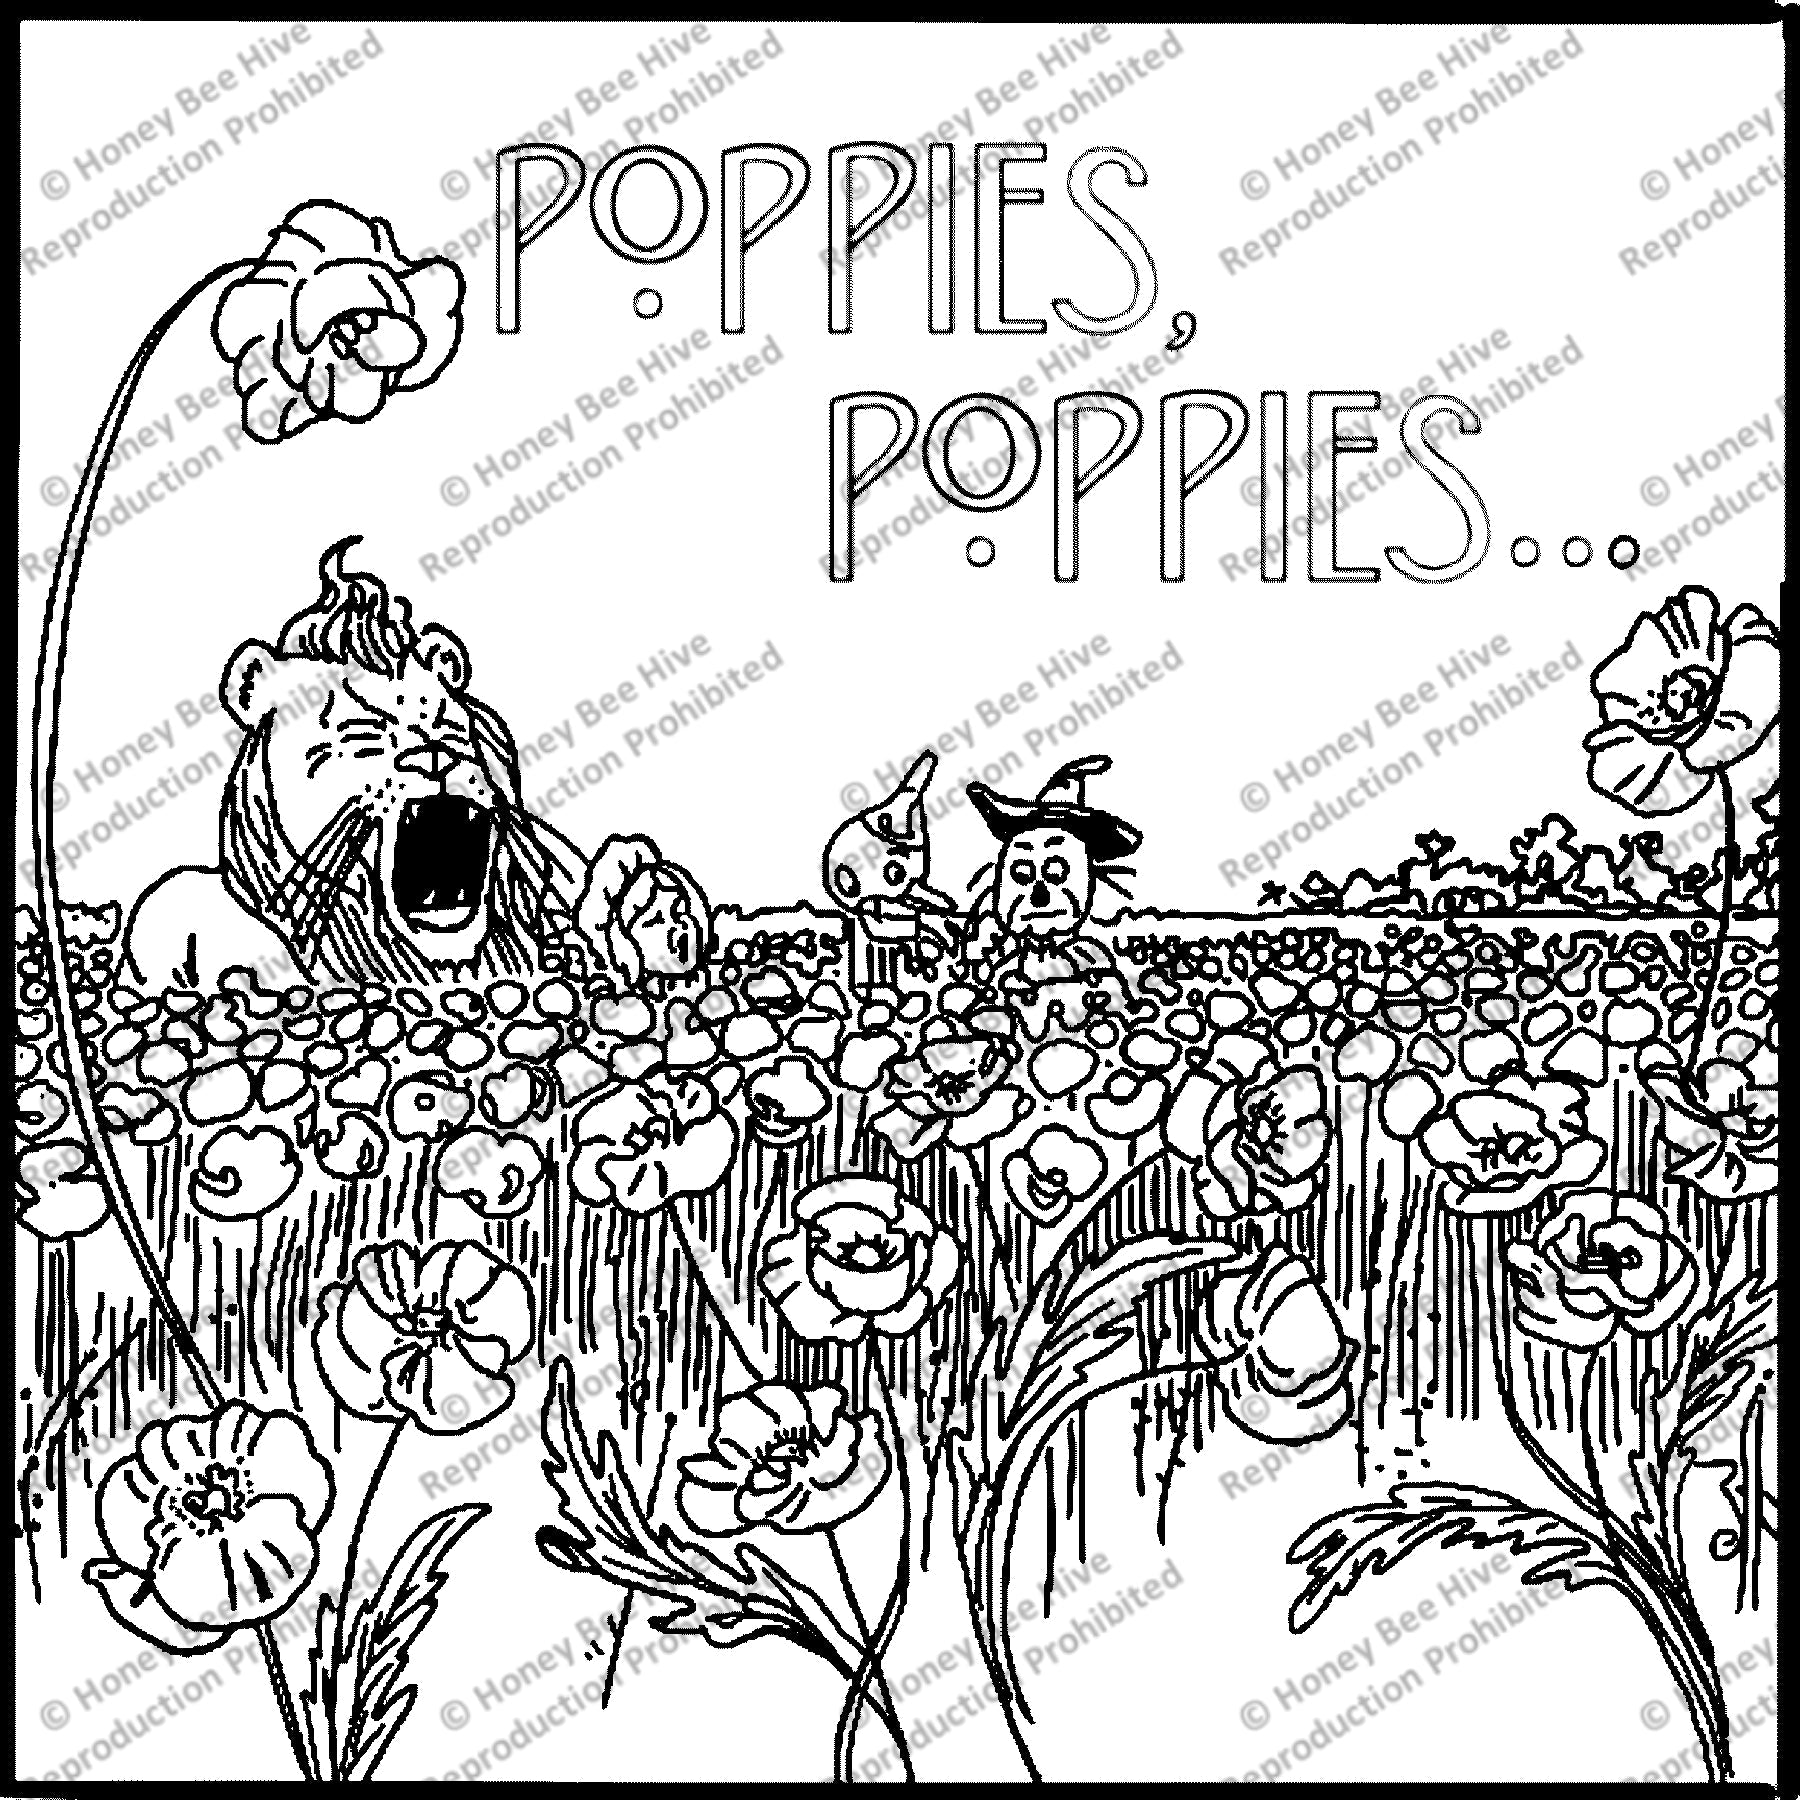 Poppies, Poppies, ill. William Denslow, 1900, rug hooking pattern